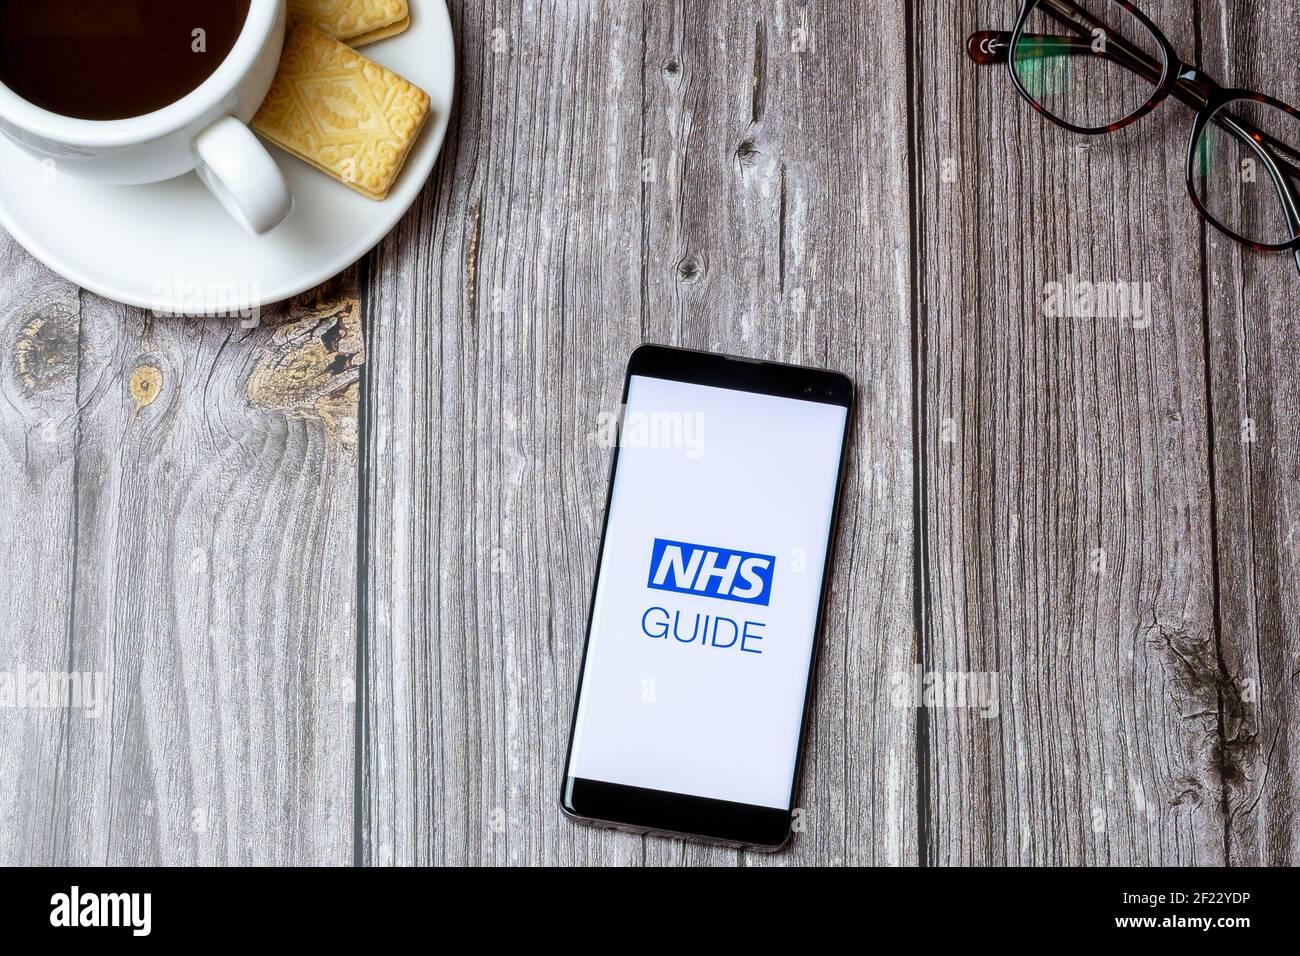 02-24-2021 Portsmouth, Hampshire, UK A mobile phone or cell phone on a wooden table with the NHS Guide app open next to a coffee and glasses Stock Photo